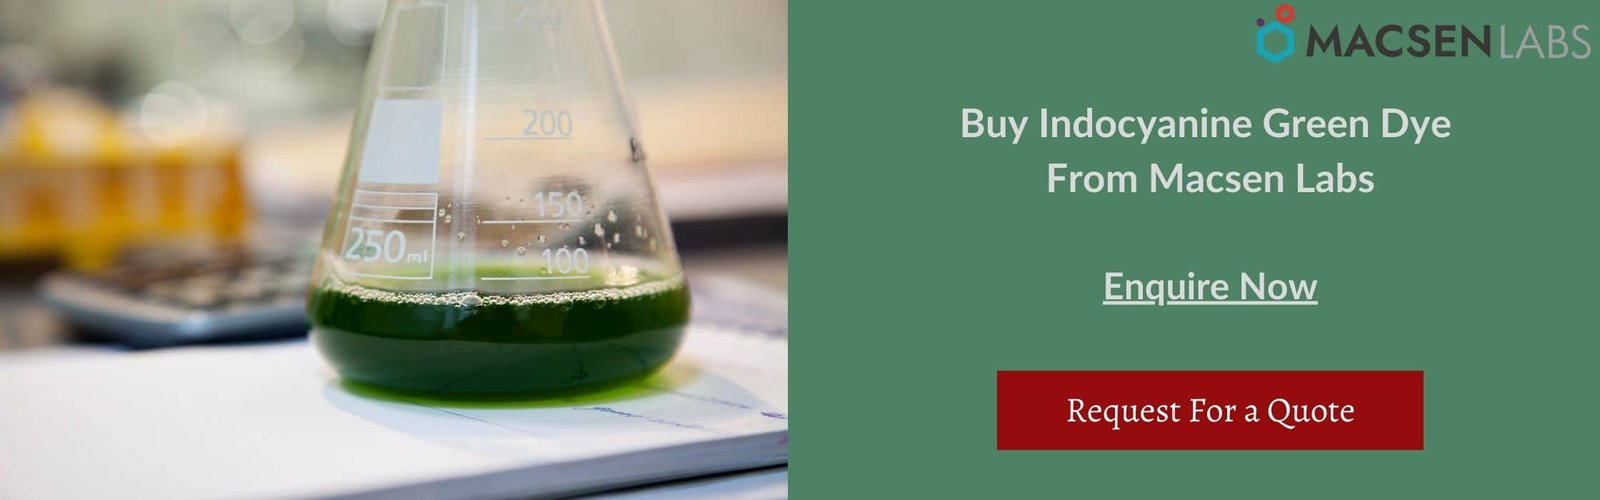 Buy Indocyanine Green Dye From Macsen Labs